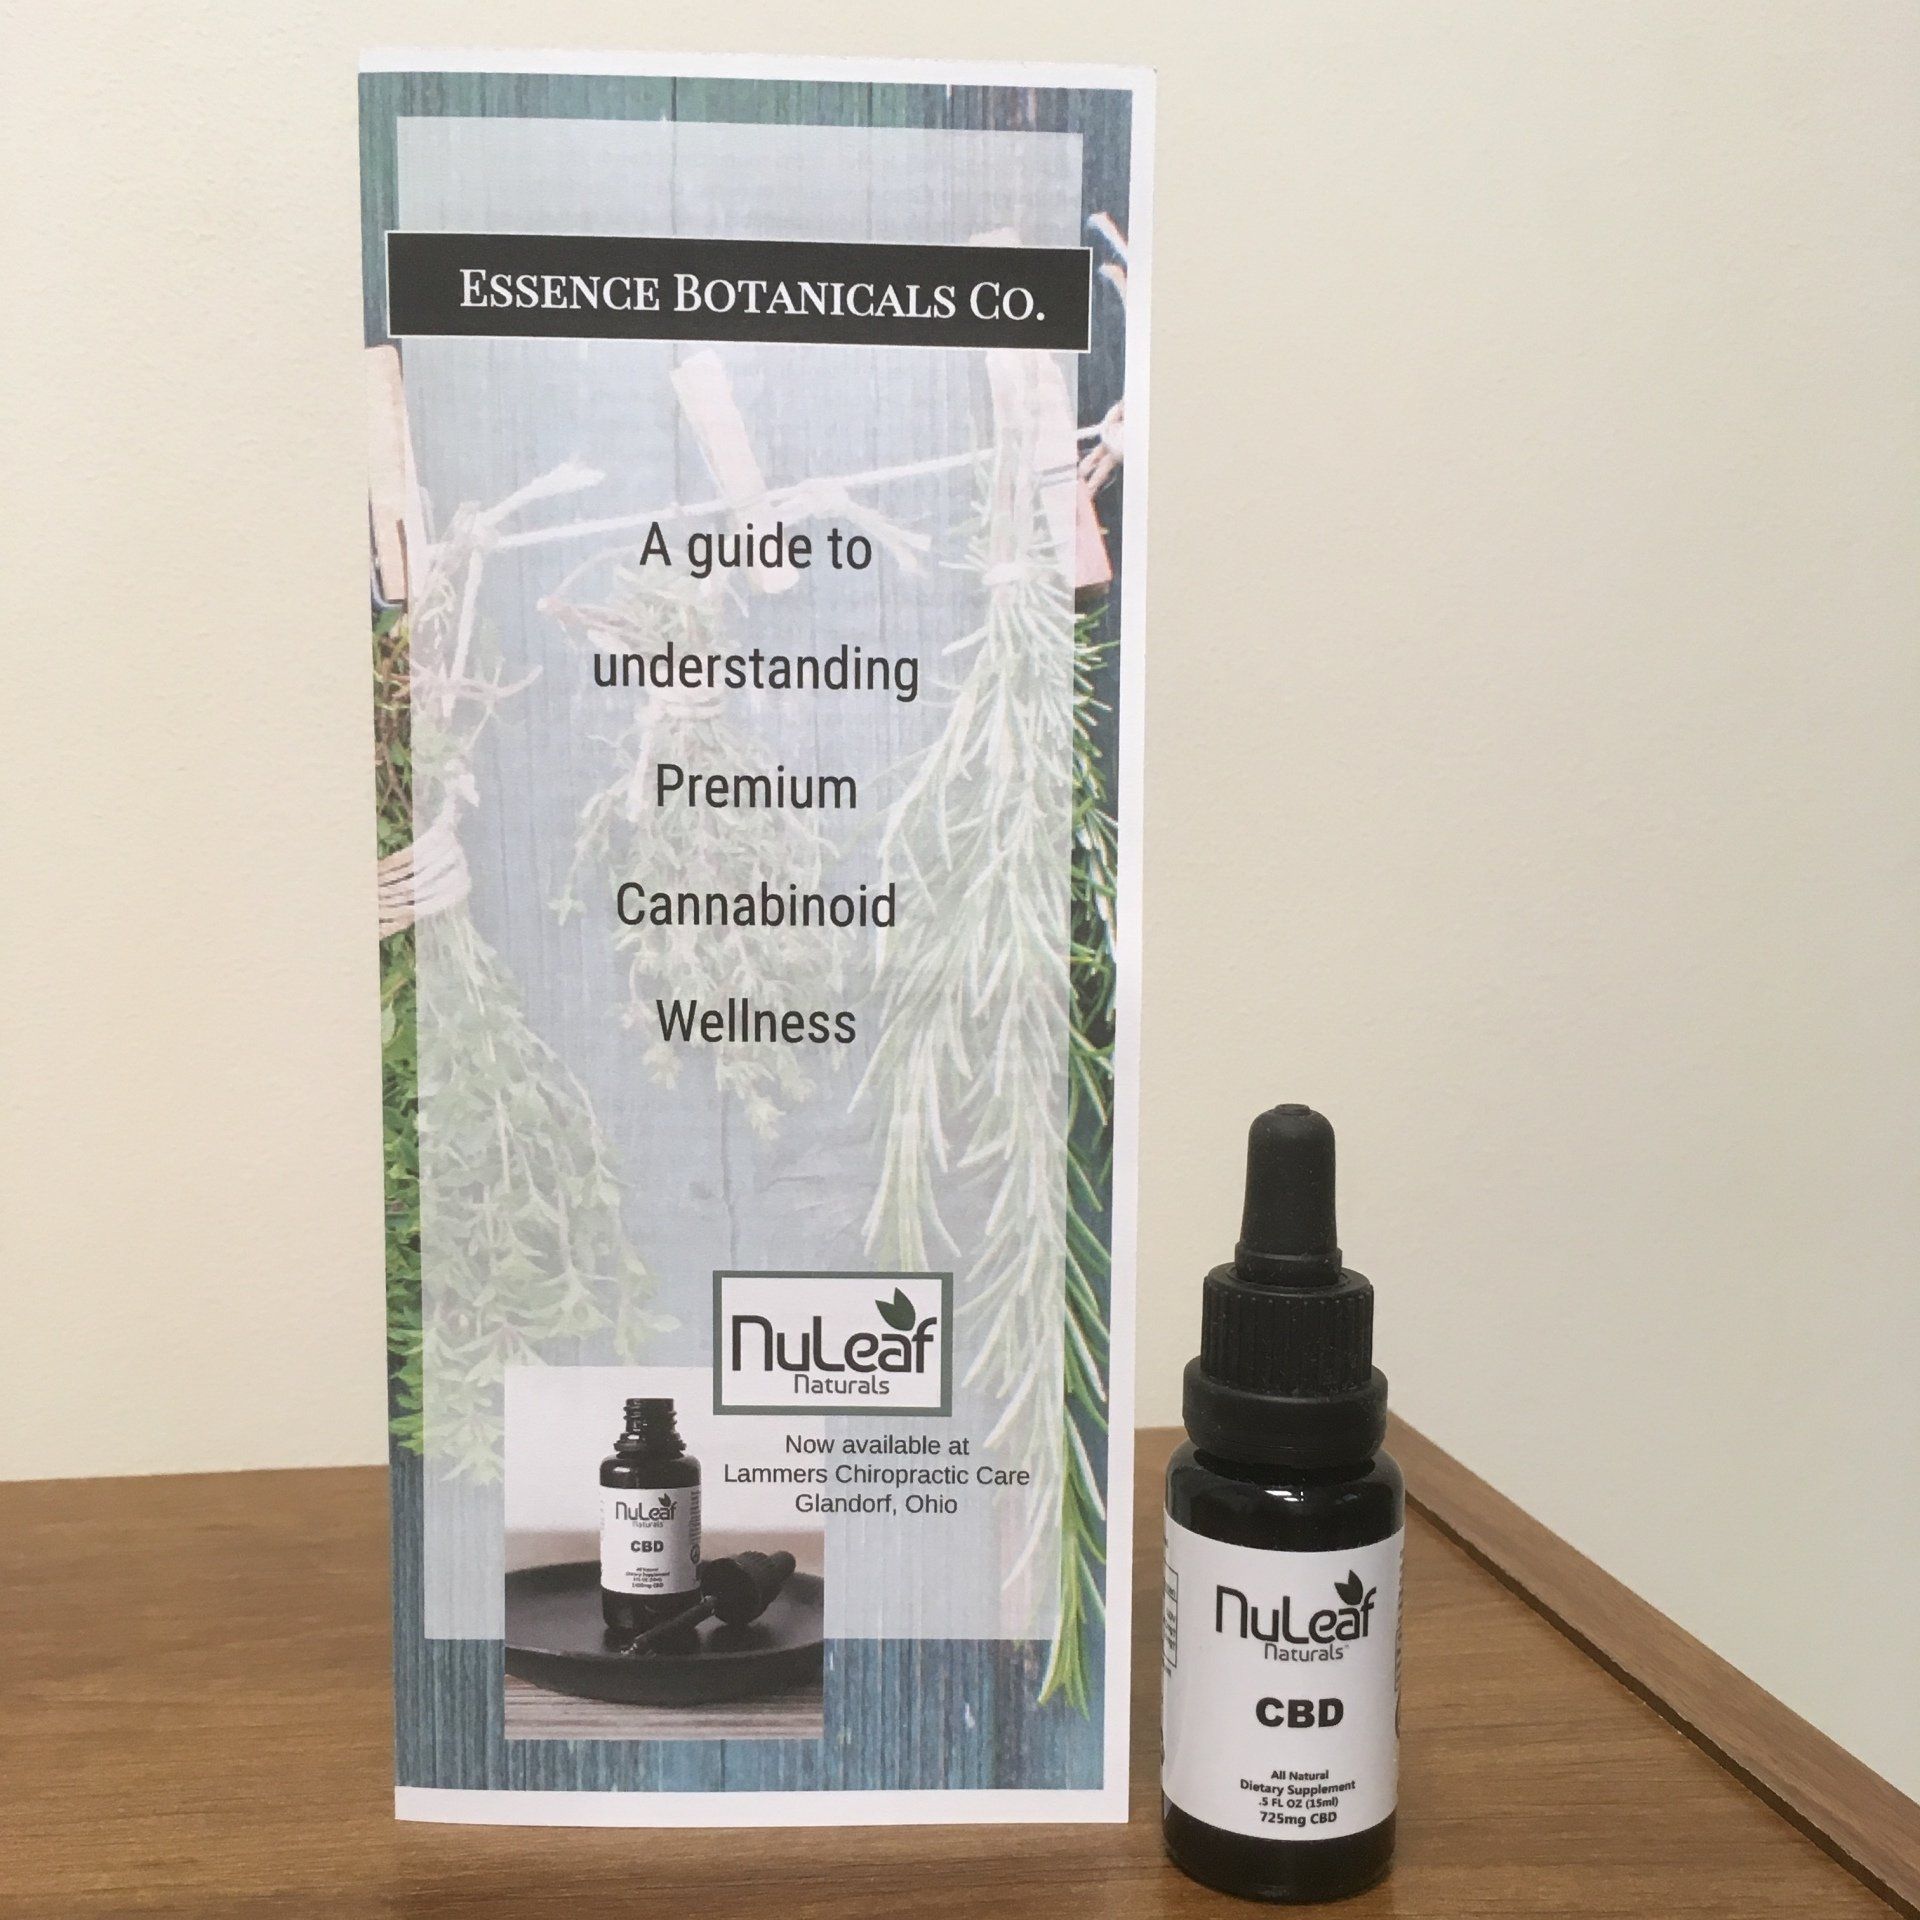 NuLeaf CBD Oil at Lammers Chiropractic